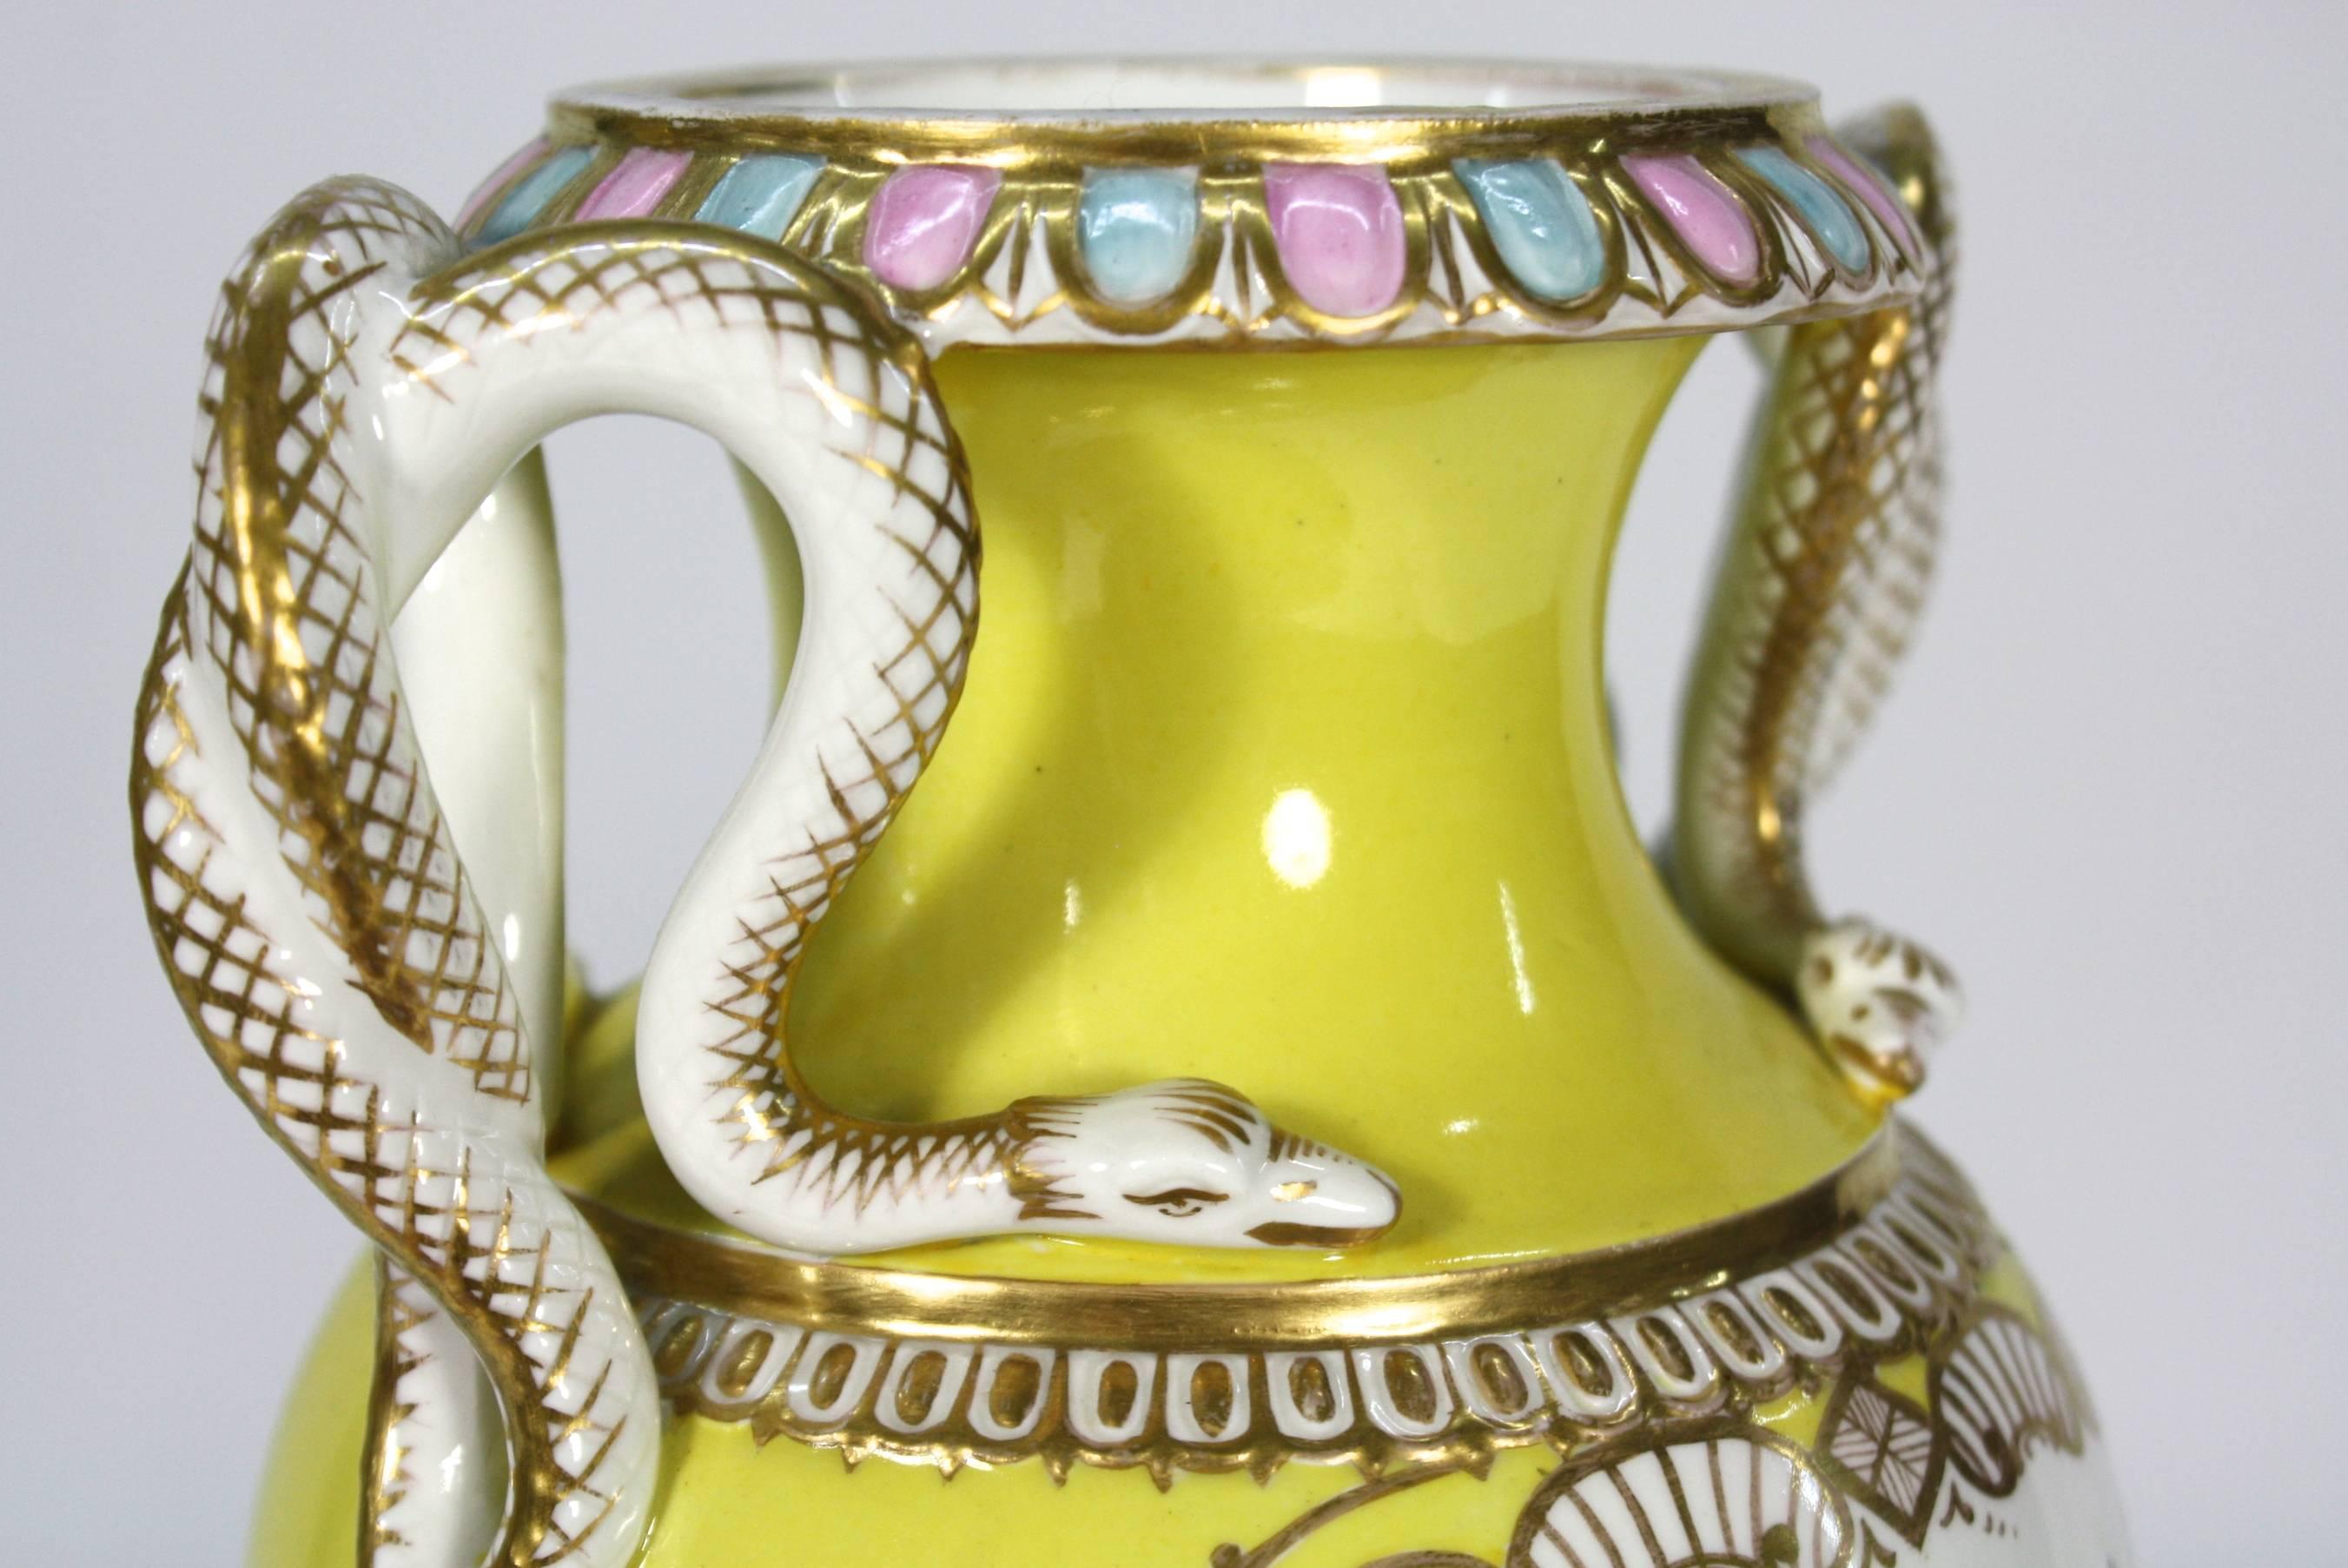 Pair of Meissen Porcelain Vases with Snake Handles In Good Condition For Sale In Pembroke, MA